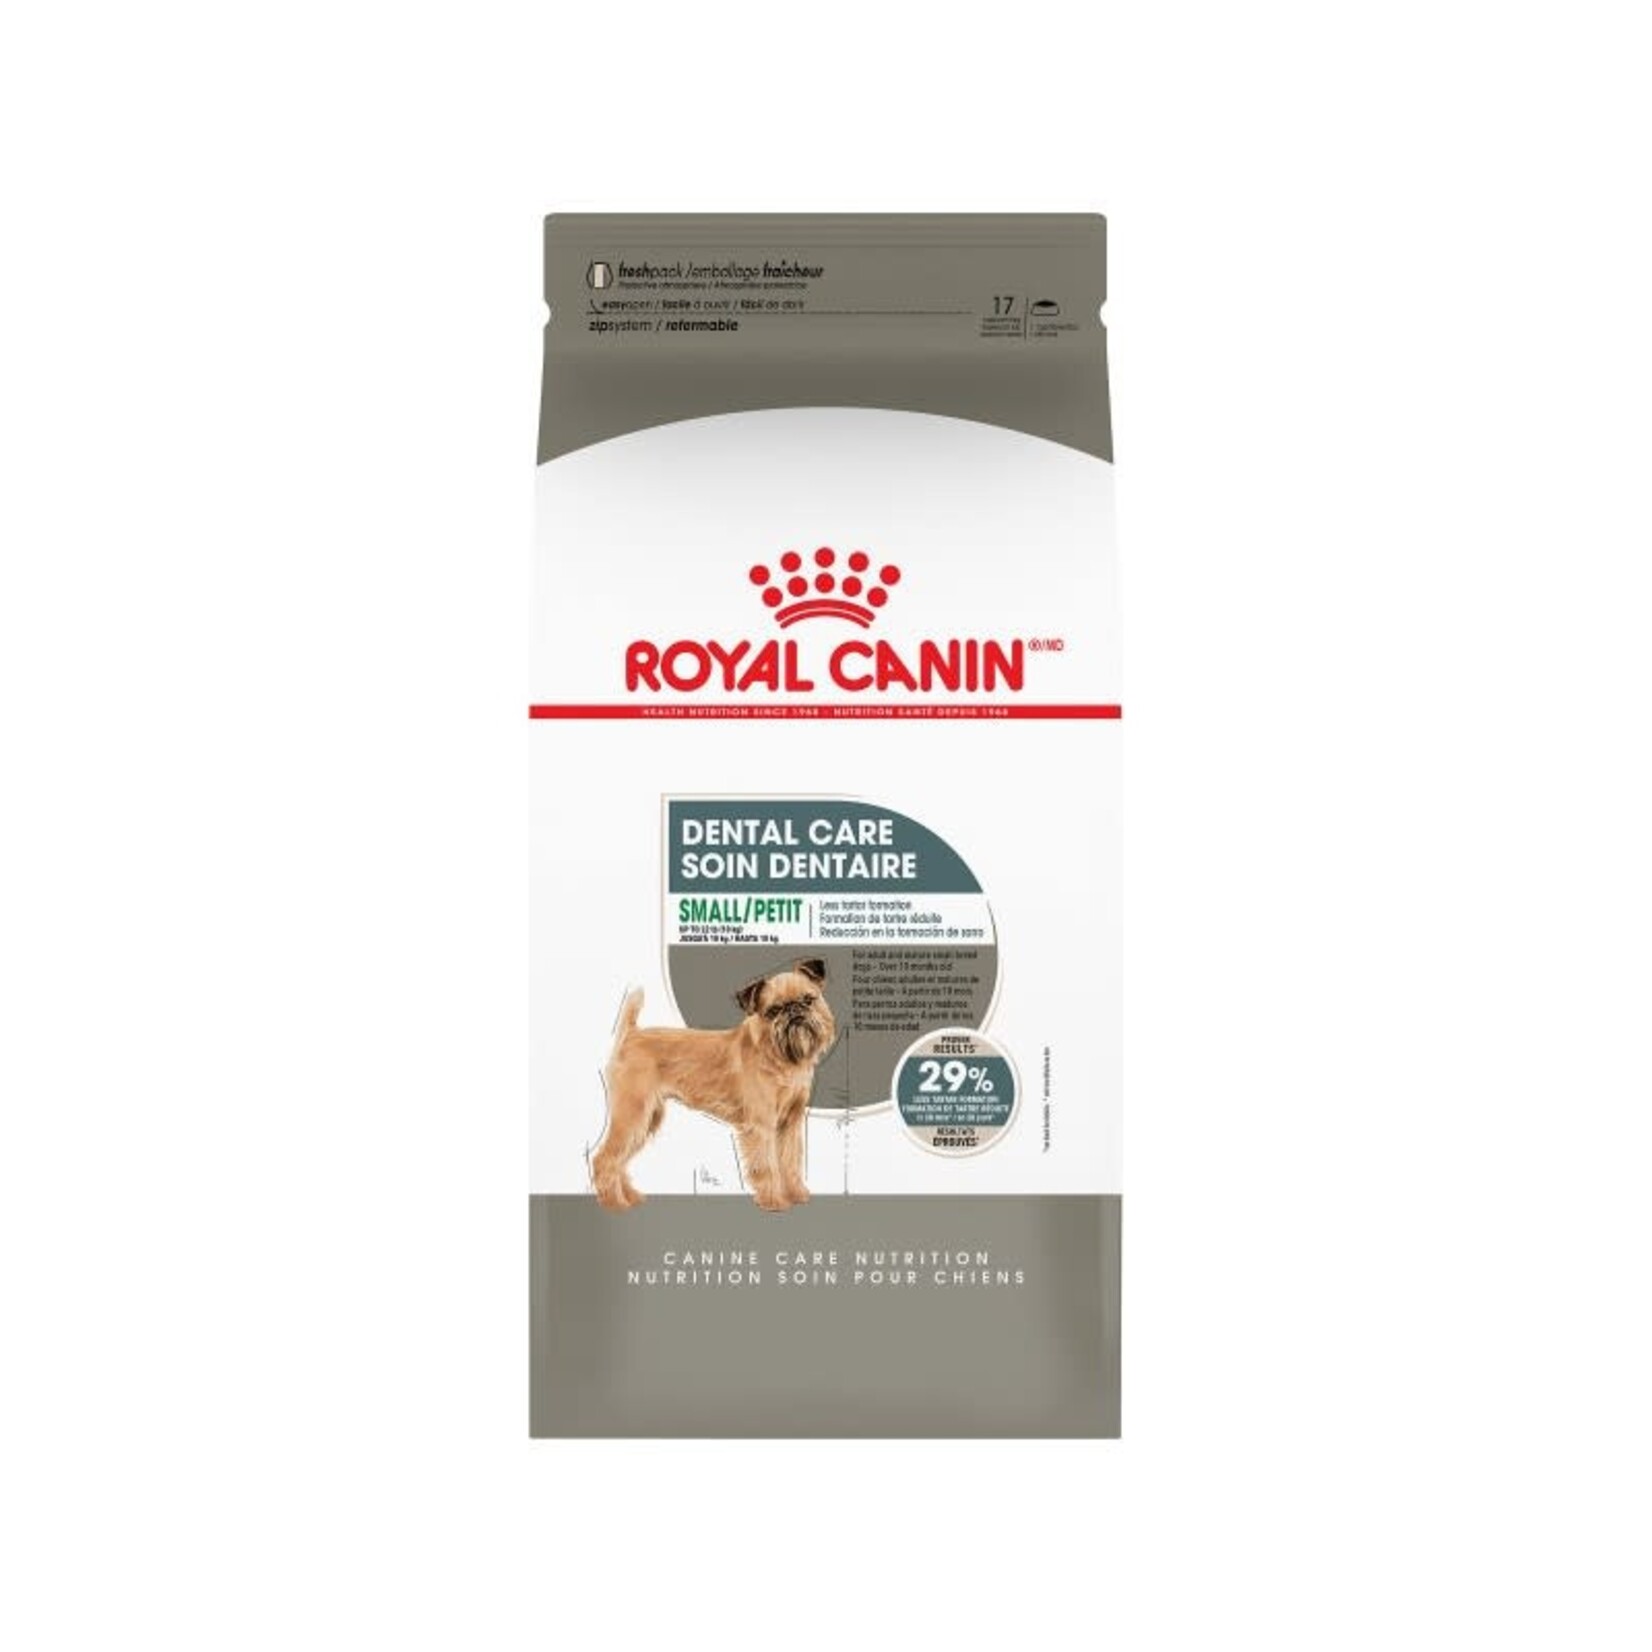 Royal Canin Royal Canin Soin dentaire pour petit chien 3lbs